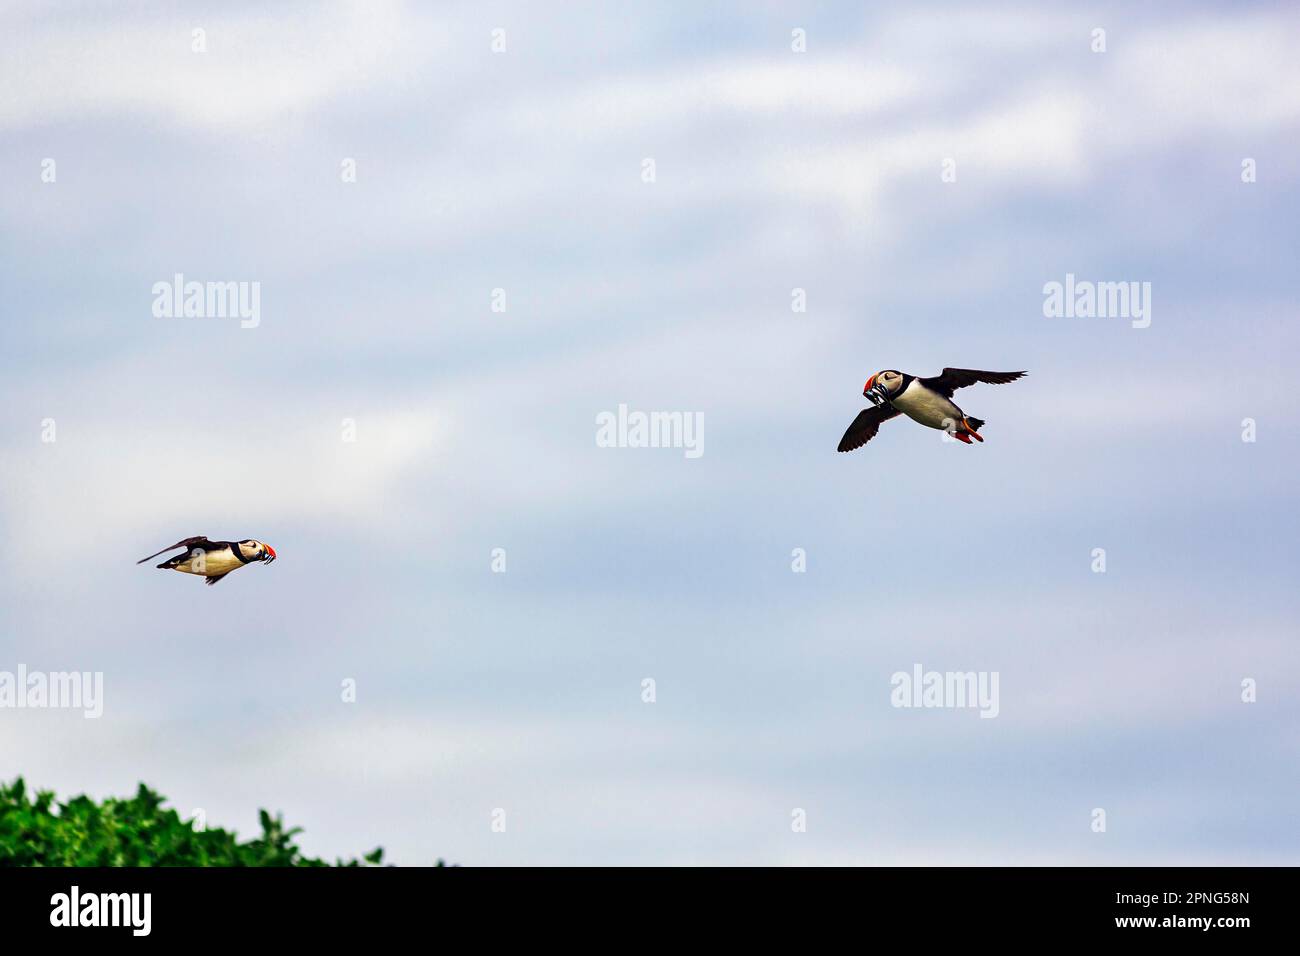 Two Puffins (Fratercula arctica), Puffin flying, sandeels (AmmodytidaeI) in bill, releasable, Staple Island, Farne Islands Nature Reserve, Farne Stock Photo